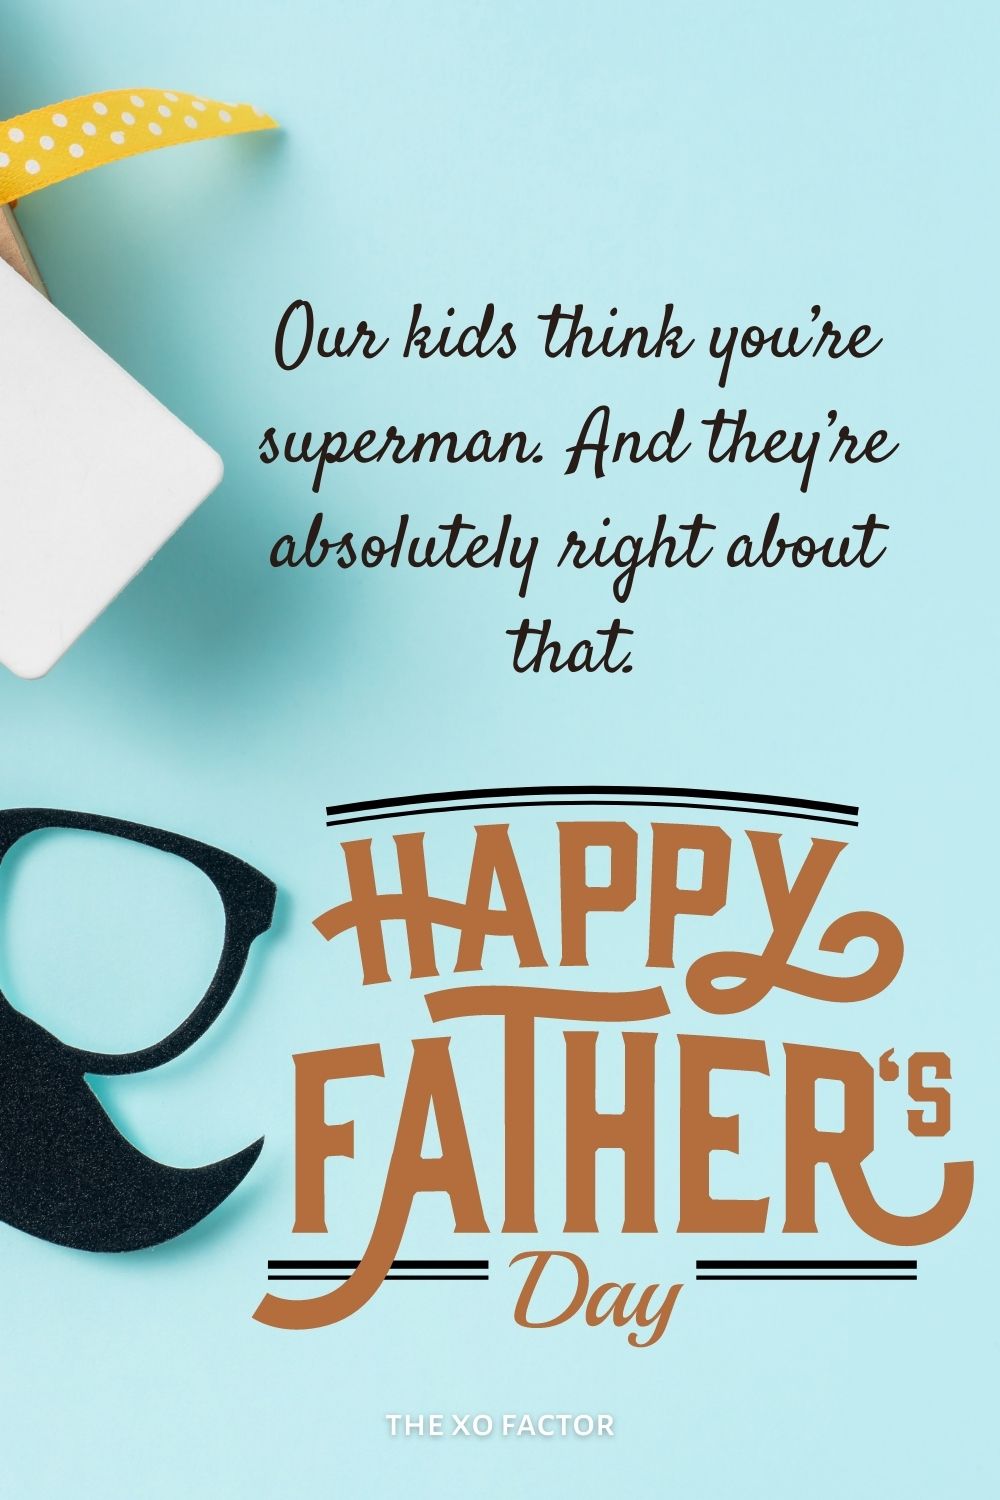 Our kids think you’re superman. And they’re absolutely right about that. Happy Father’s day!